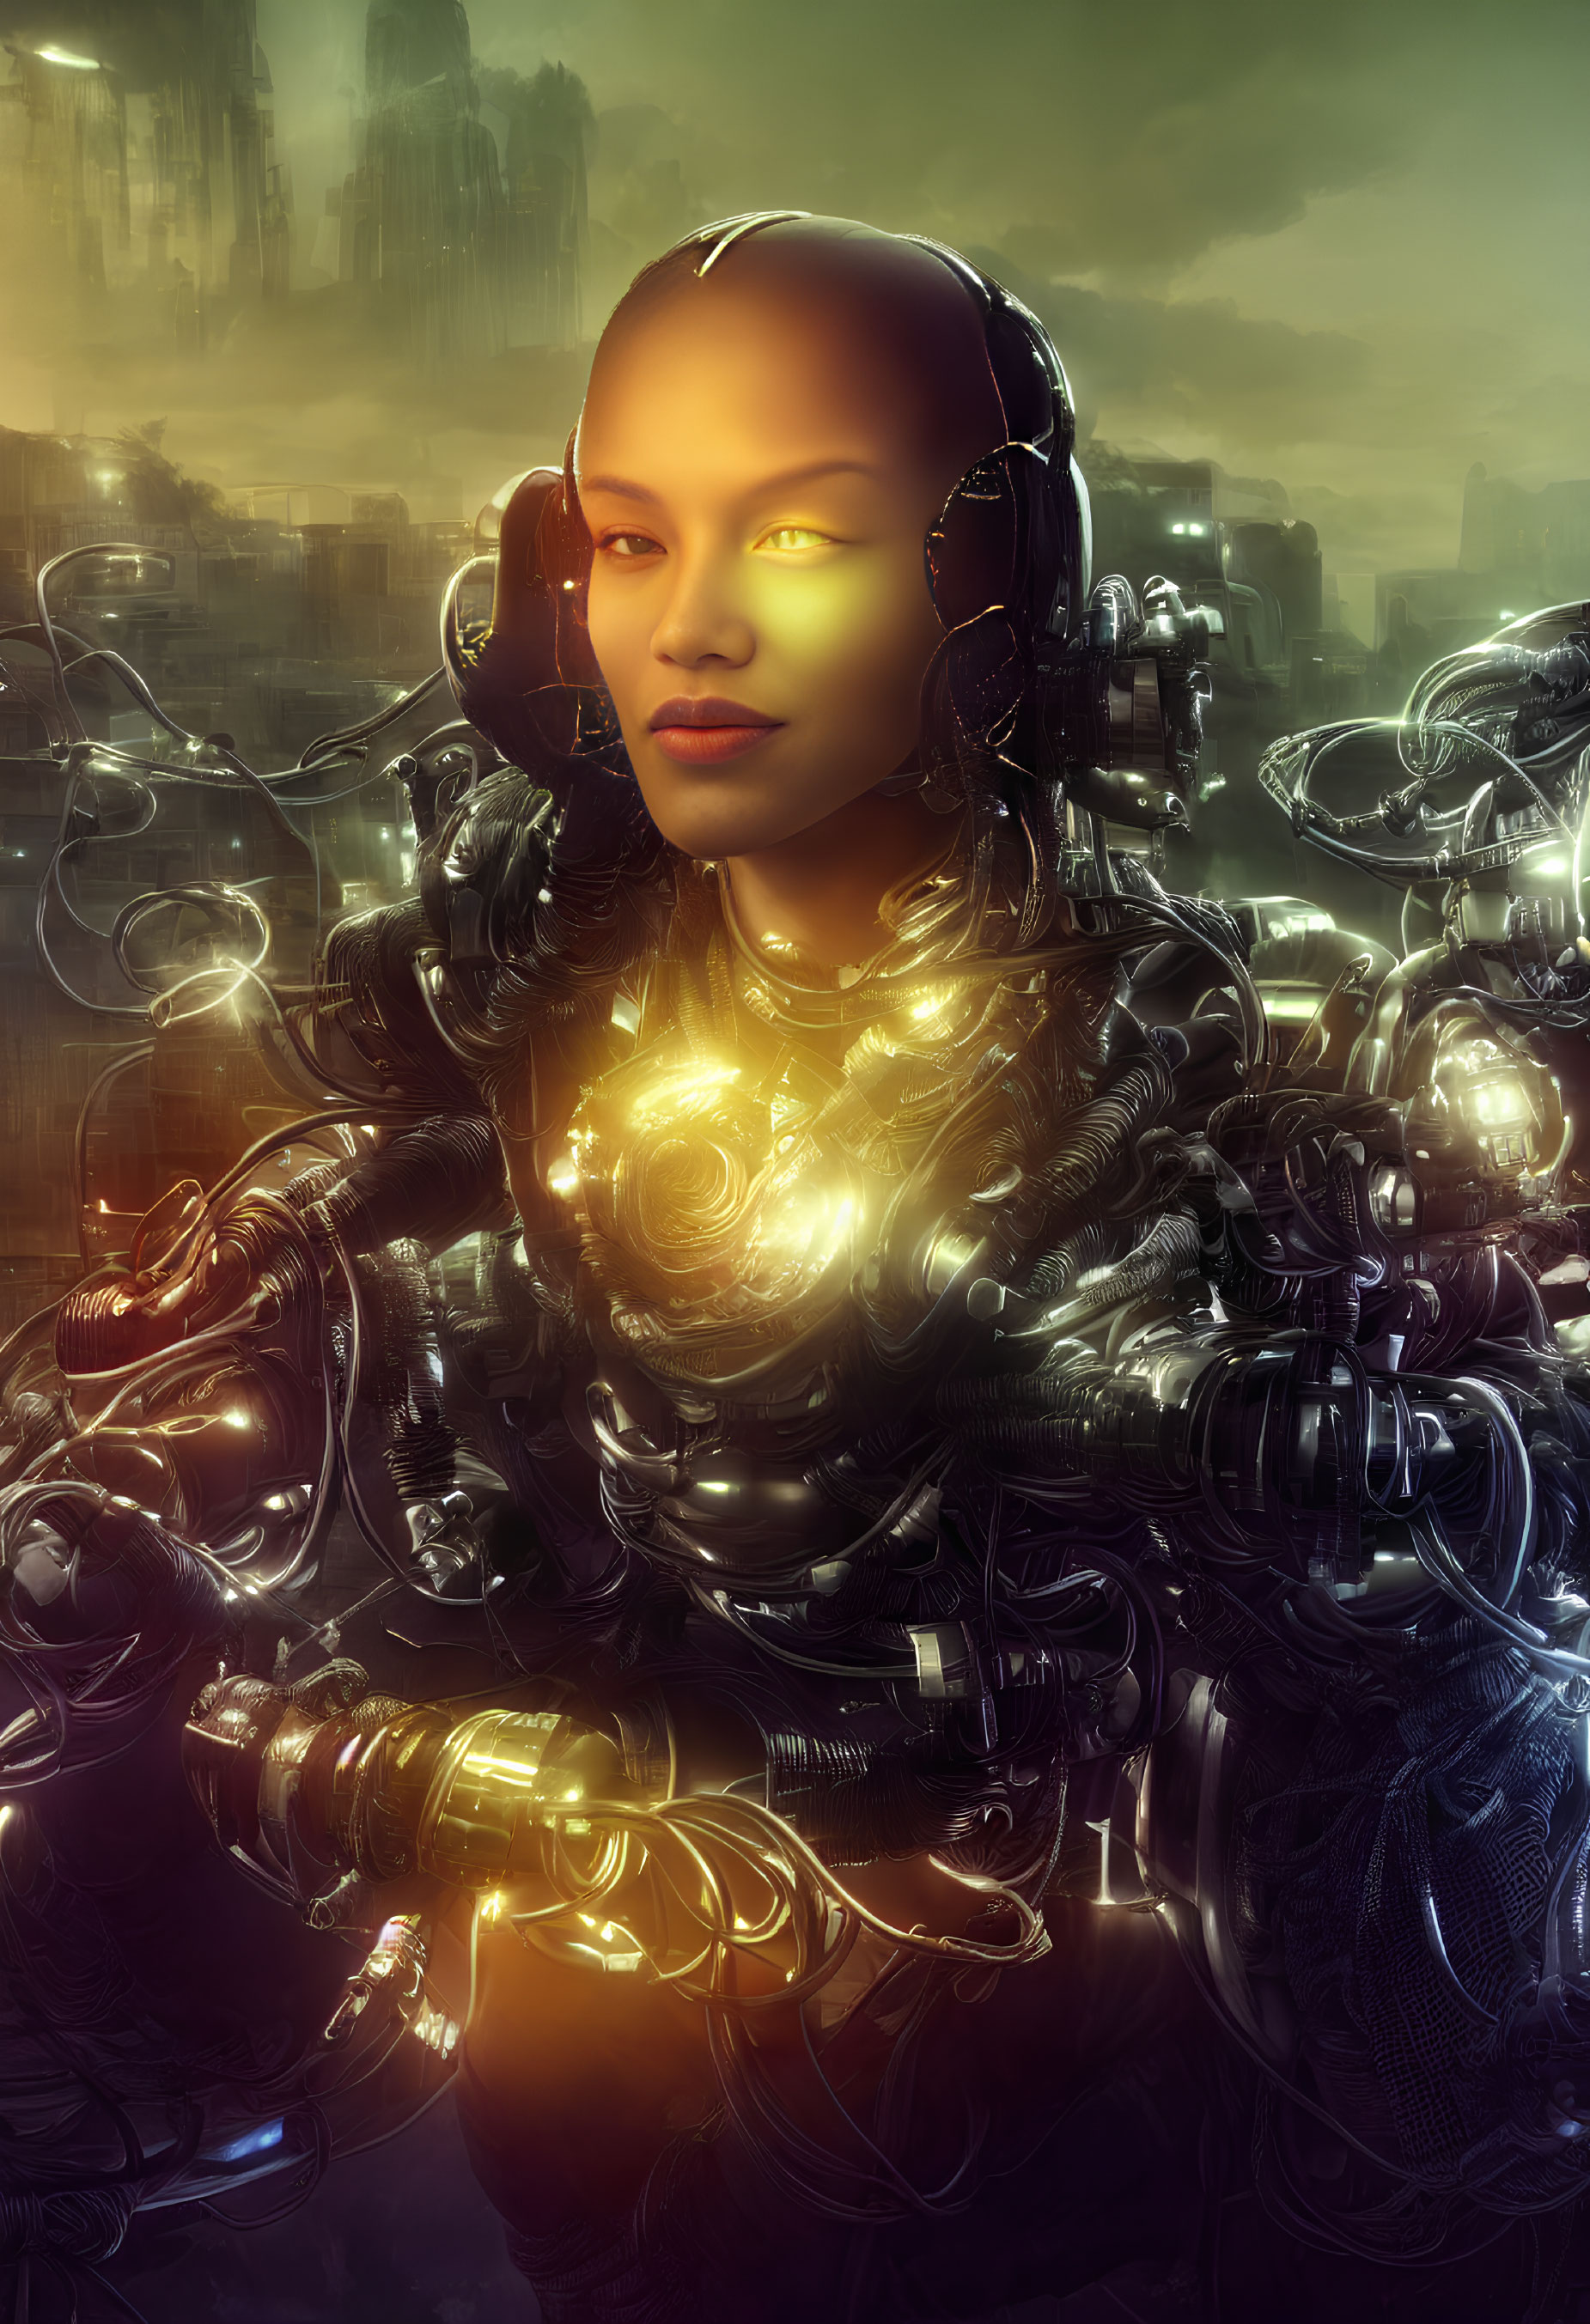 Female Cyborg with Glowing Elements and Advanced Armor in Futuristic Cityscape